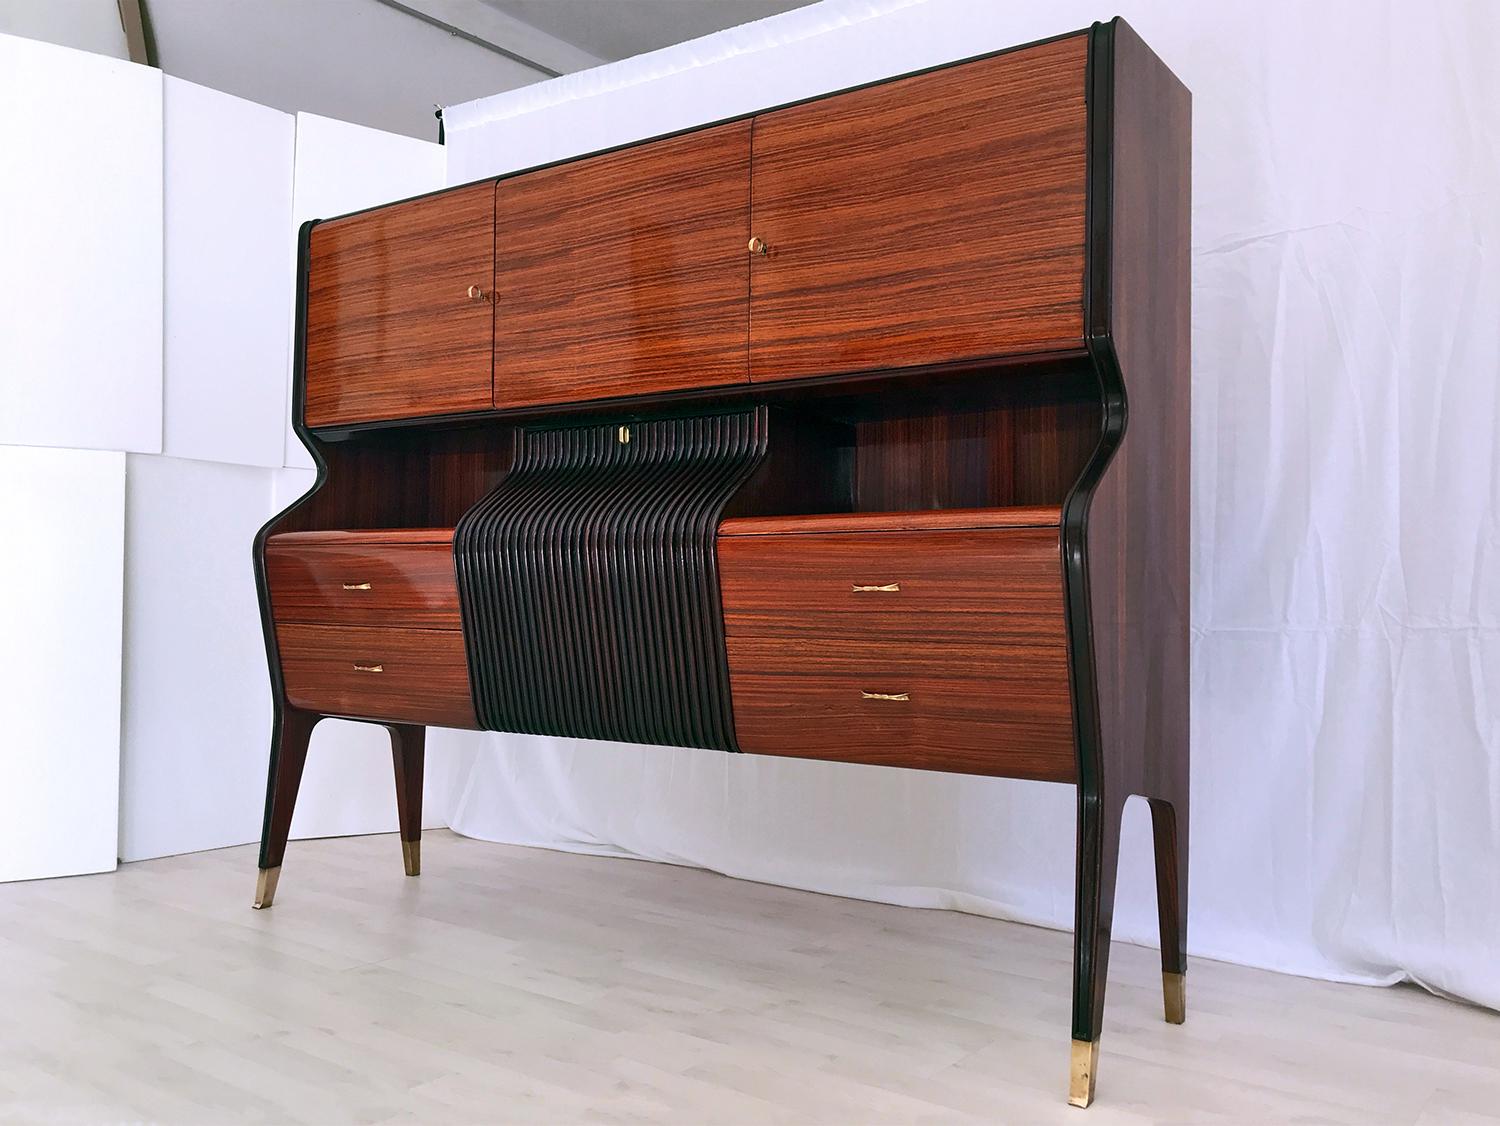 Stylish sideboard and/or bar cabinet designed by Osvaldo Borsani in the 1950s.
Its structure is characterized by a unique shape design given by its amazing curved frontal profile of the central drop-down door, very refined and finished with